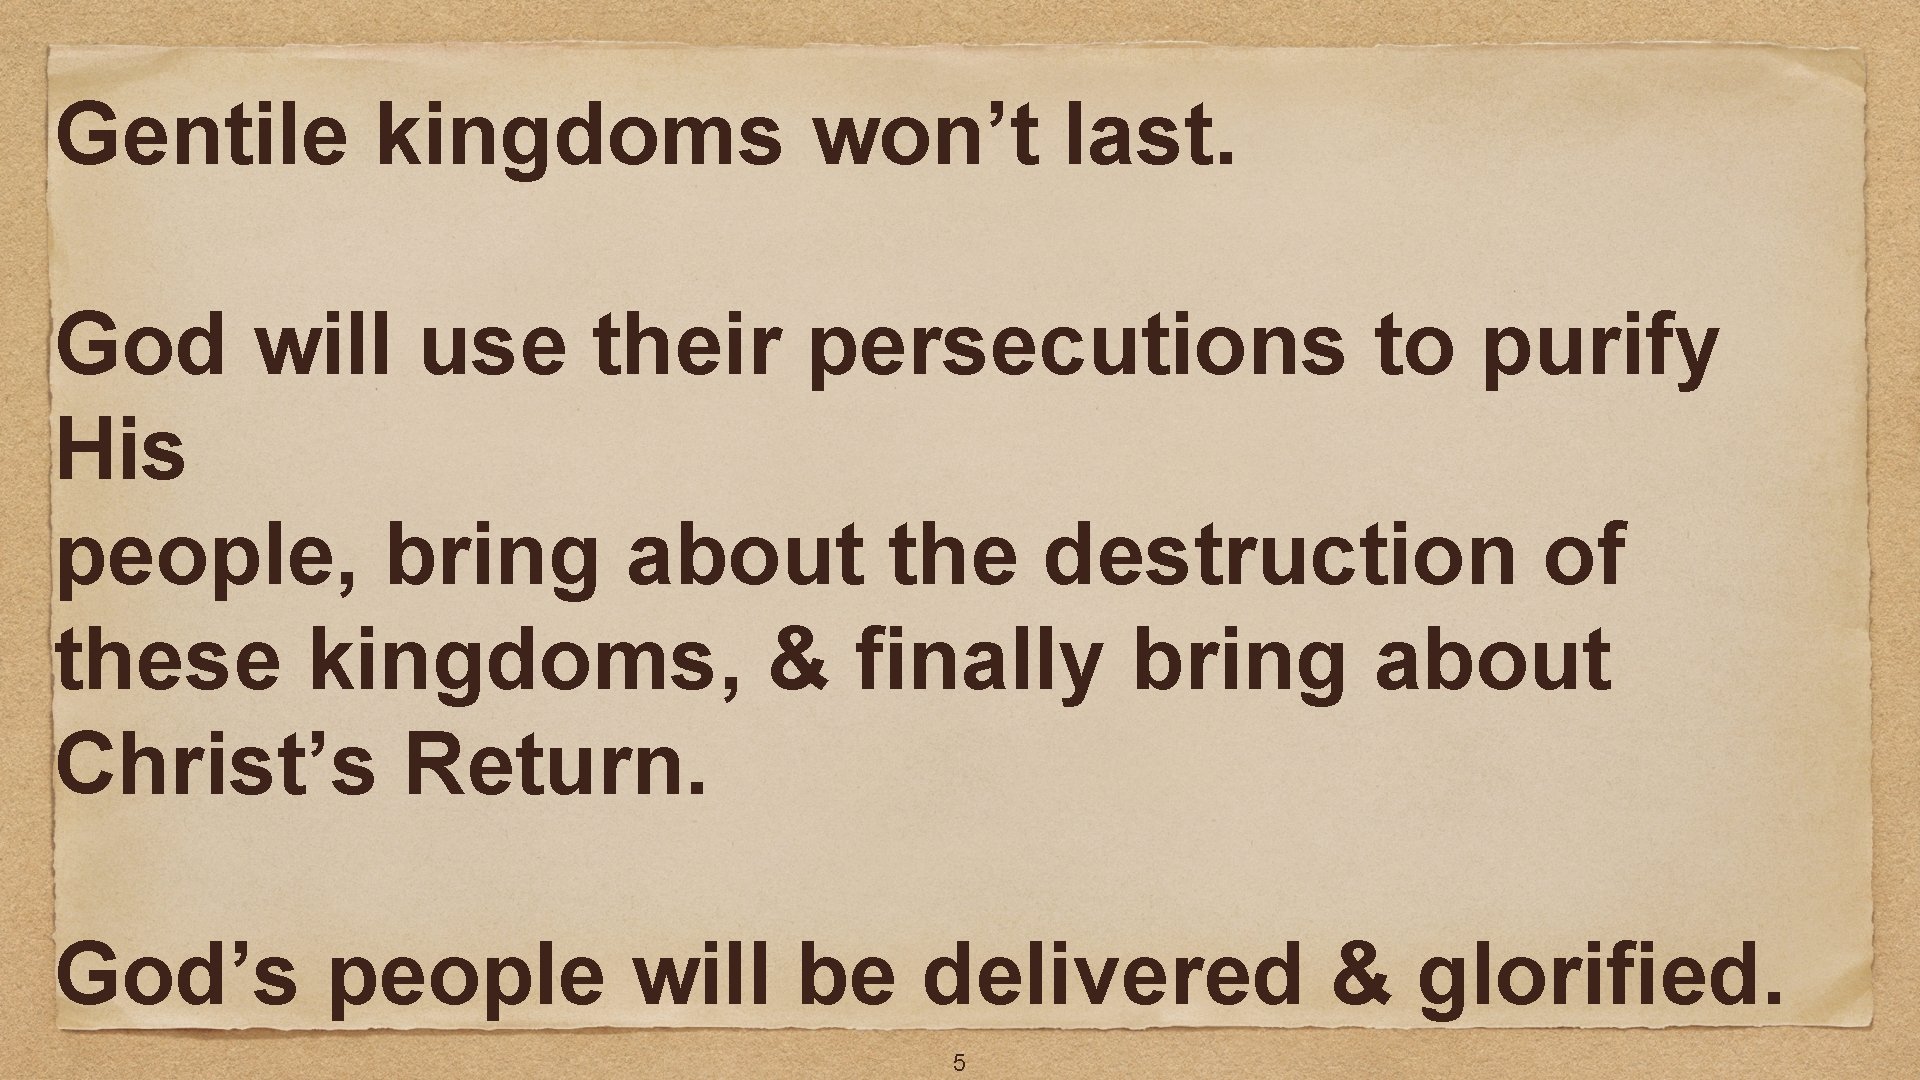 Gentile kingdoms won’t last. God will use their persecutions to purify His people, bring